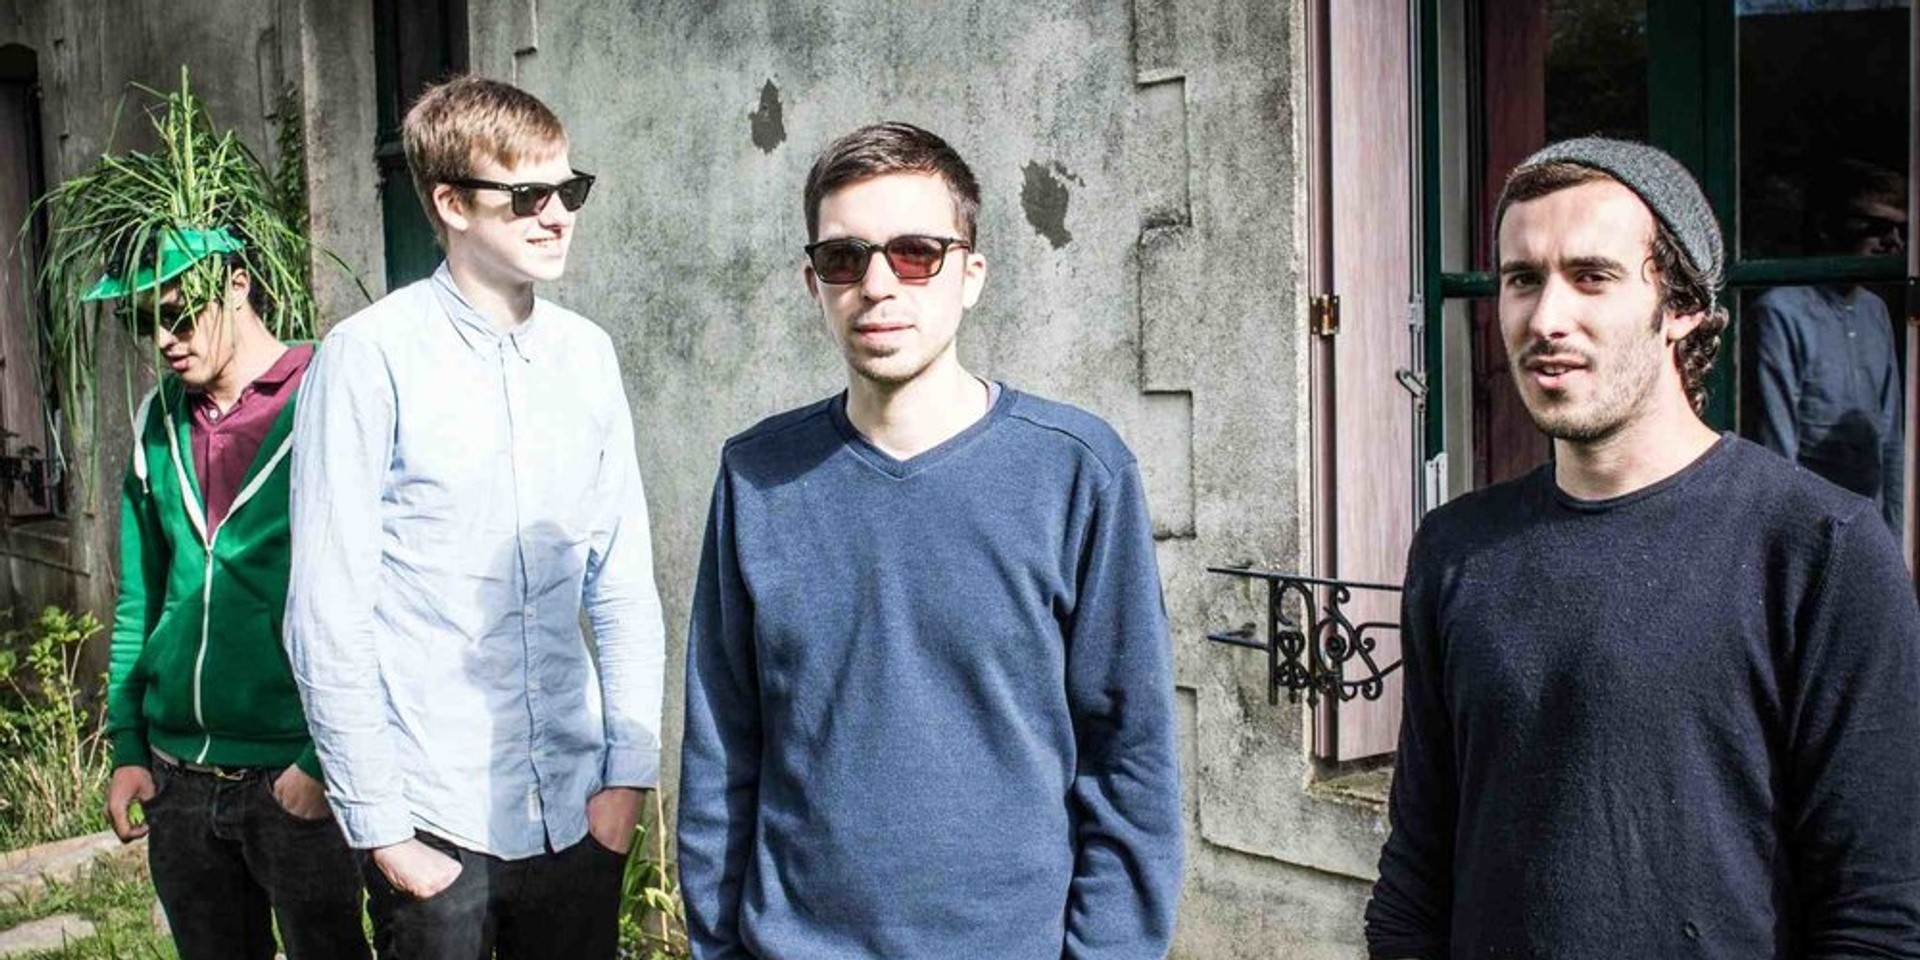 French math rock band Totorro are coming to Singapore (not Mexico)